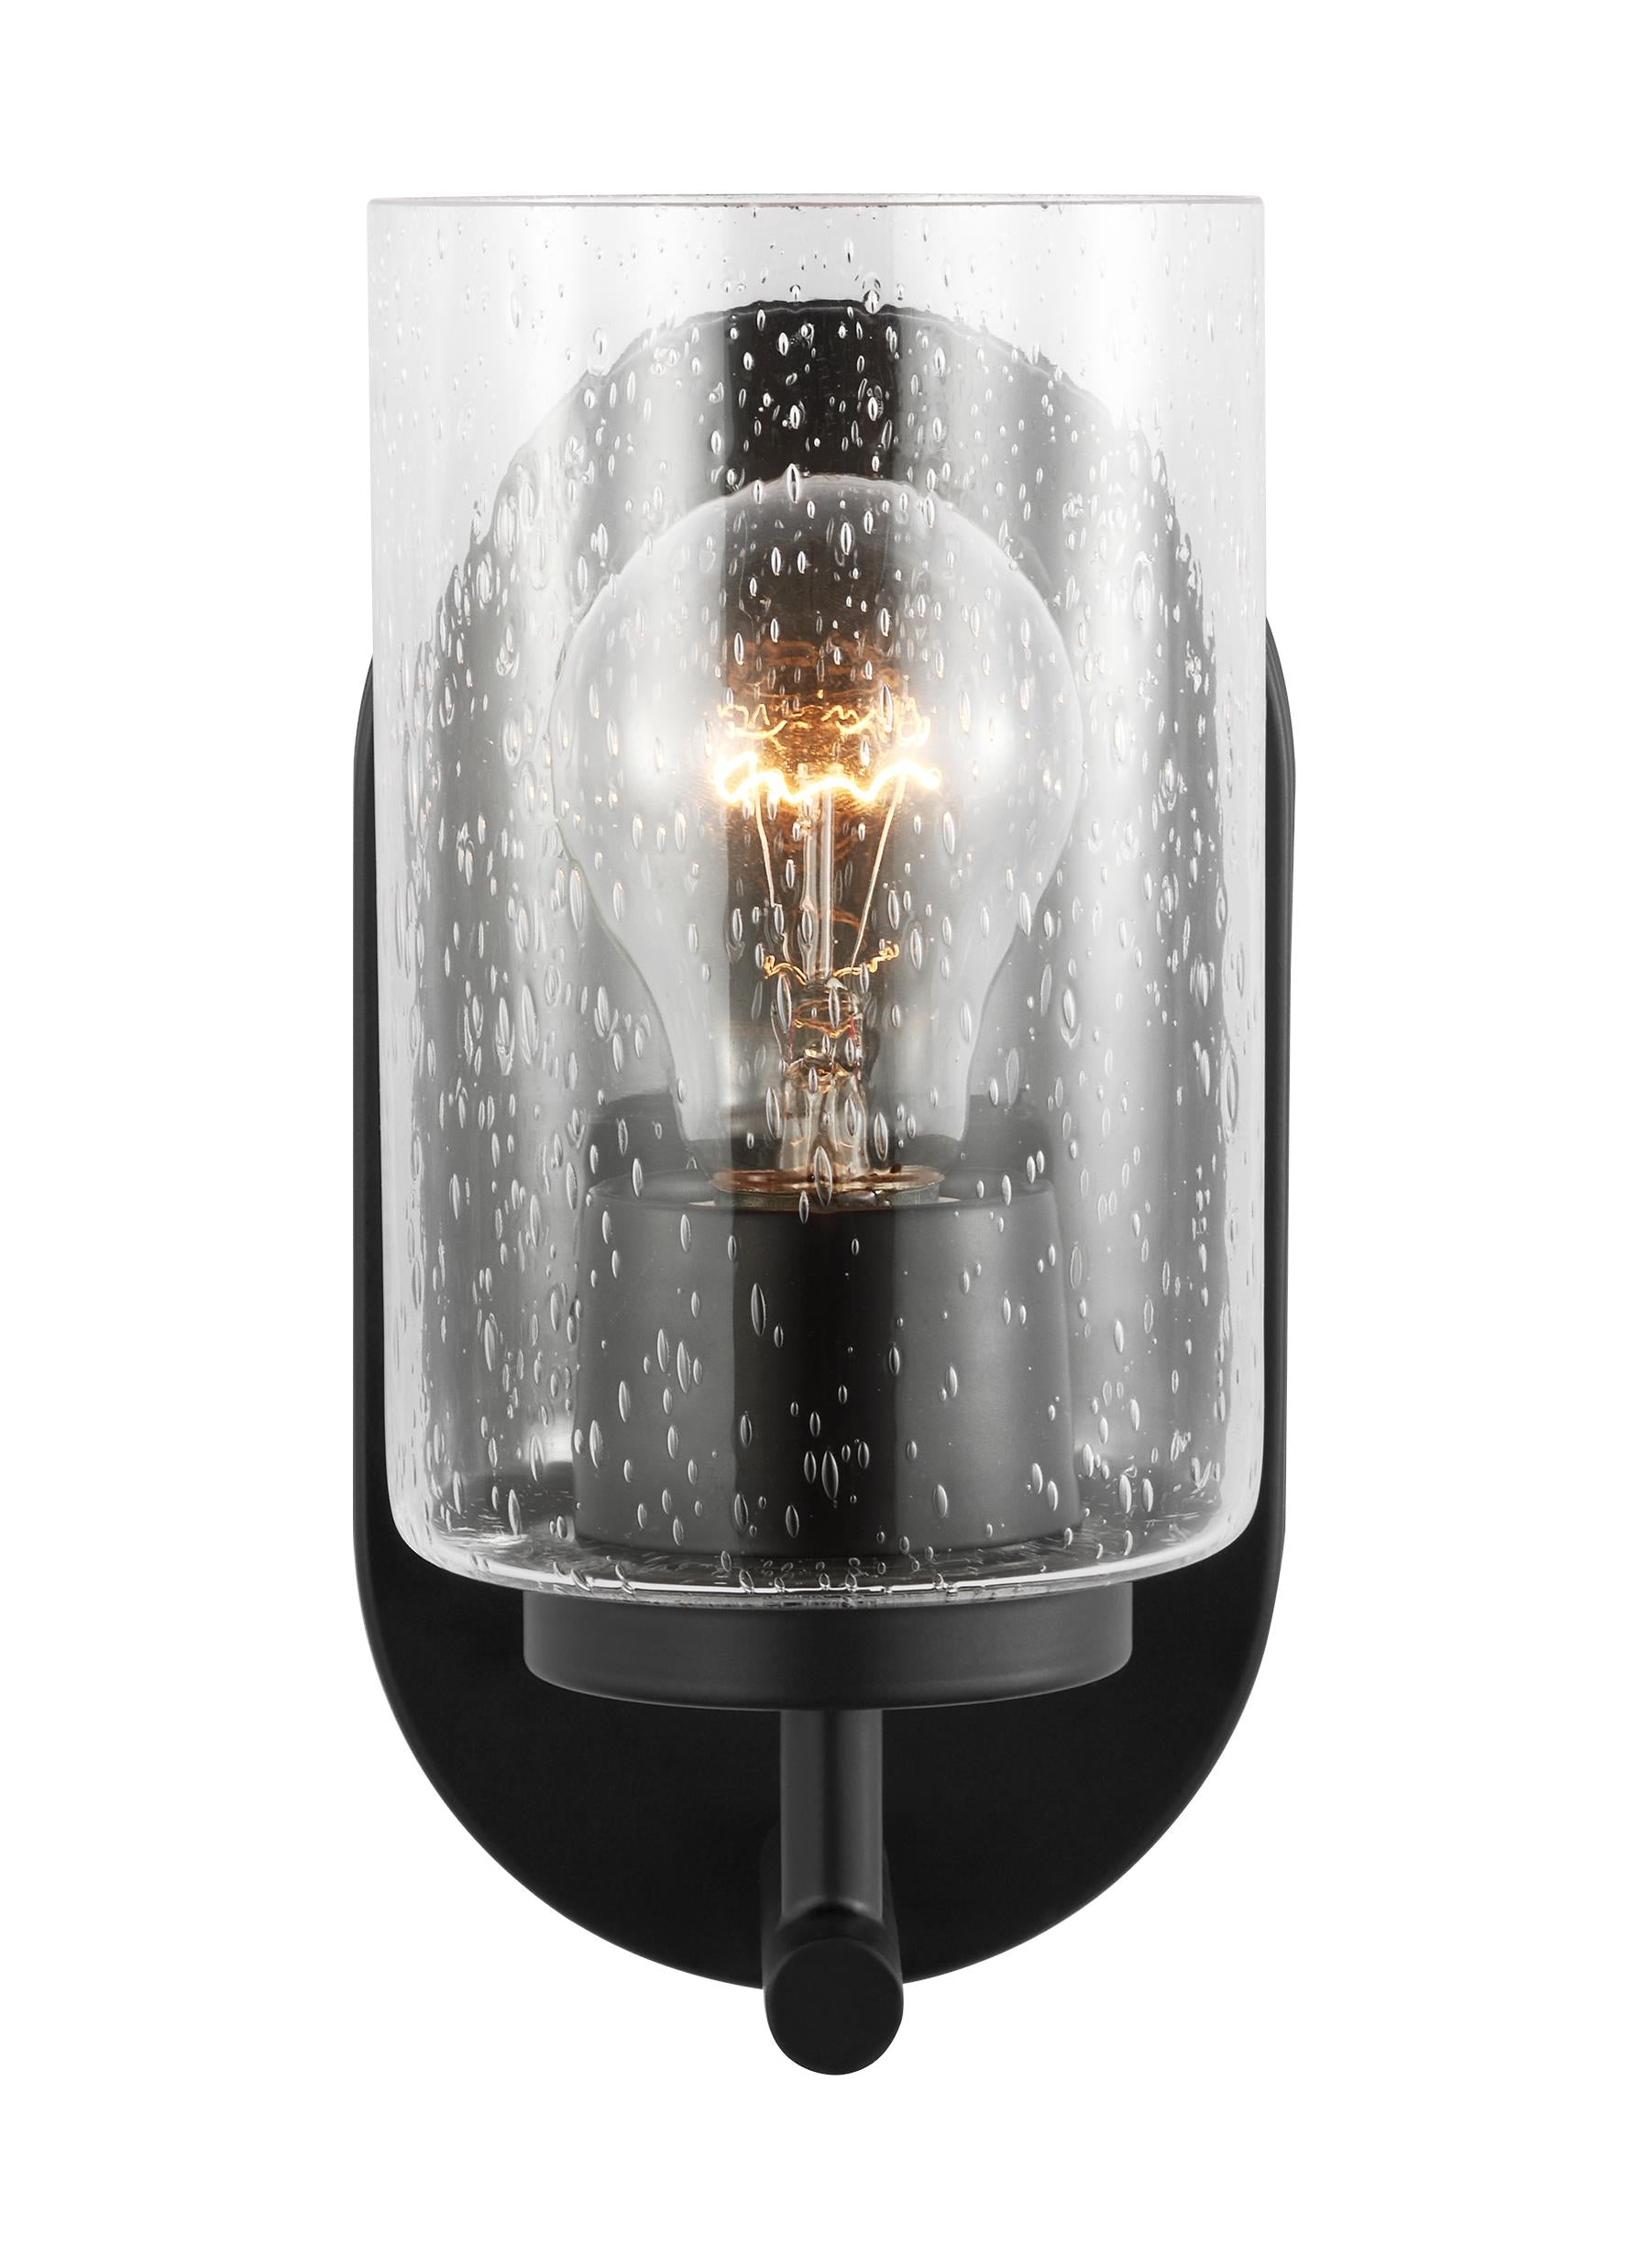 Oslo dimmable 1-light wall bath sconce in a midnight black finish with clear seeded glass shade